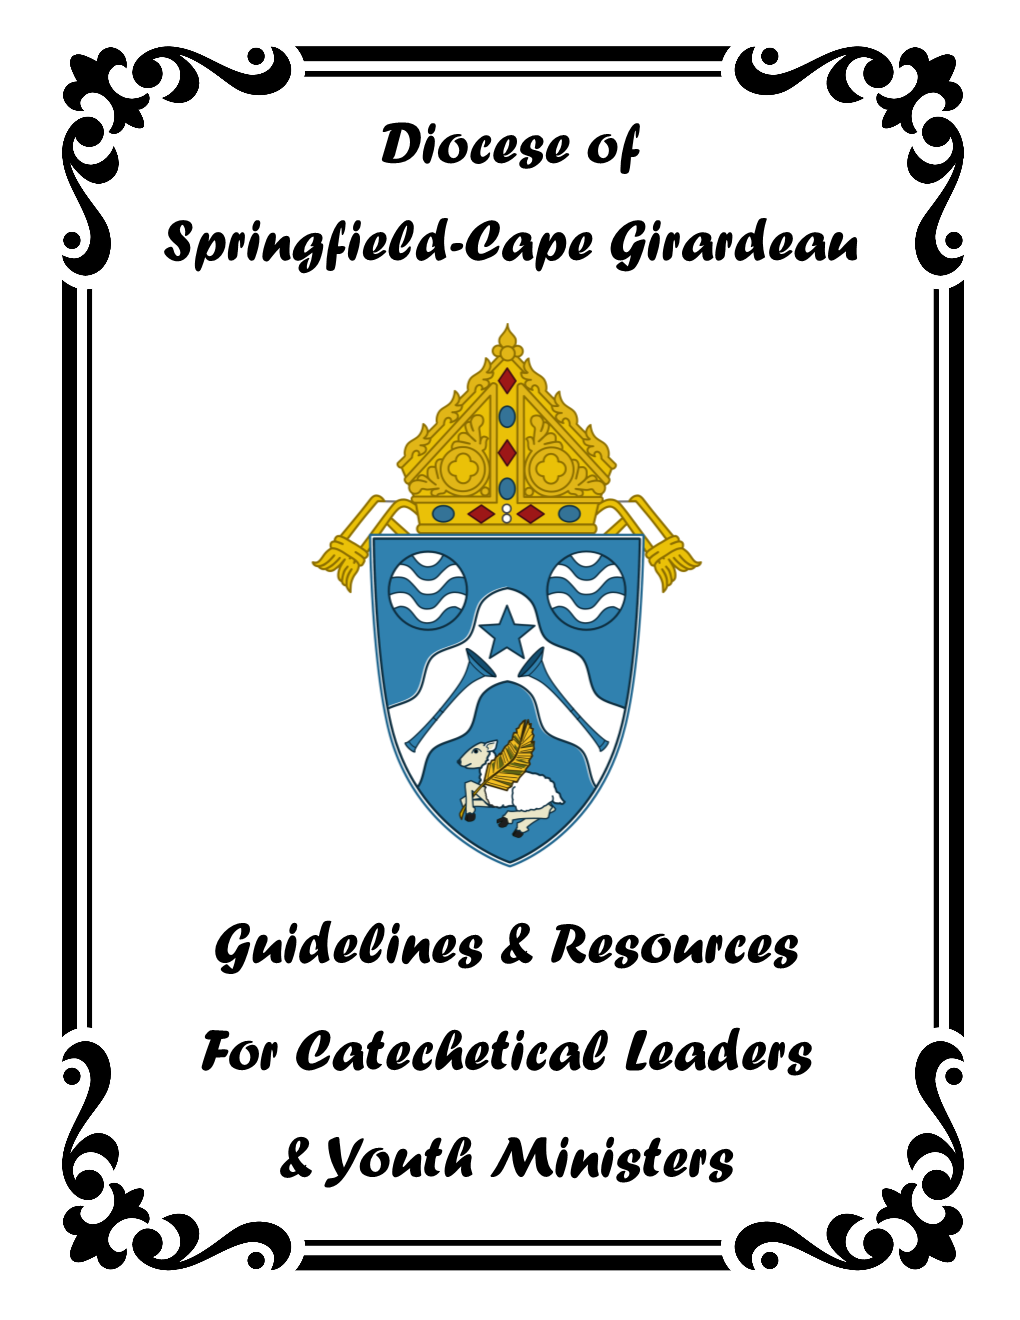 Diocese of Springfield-Cape Girardeau Guidelines & Resources